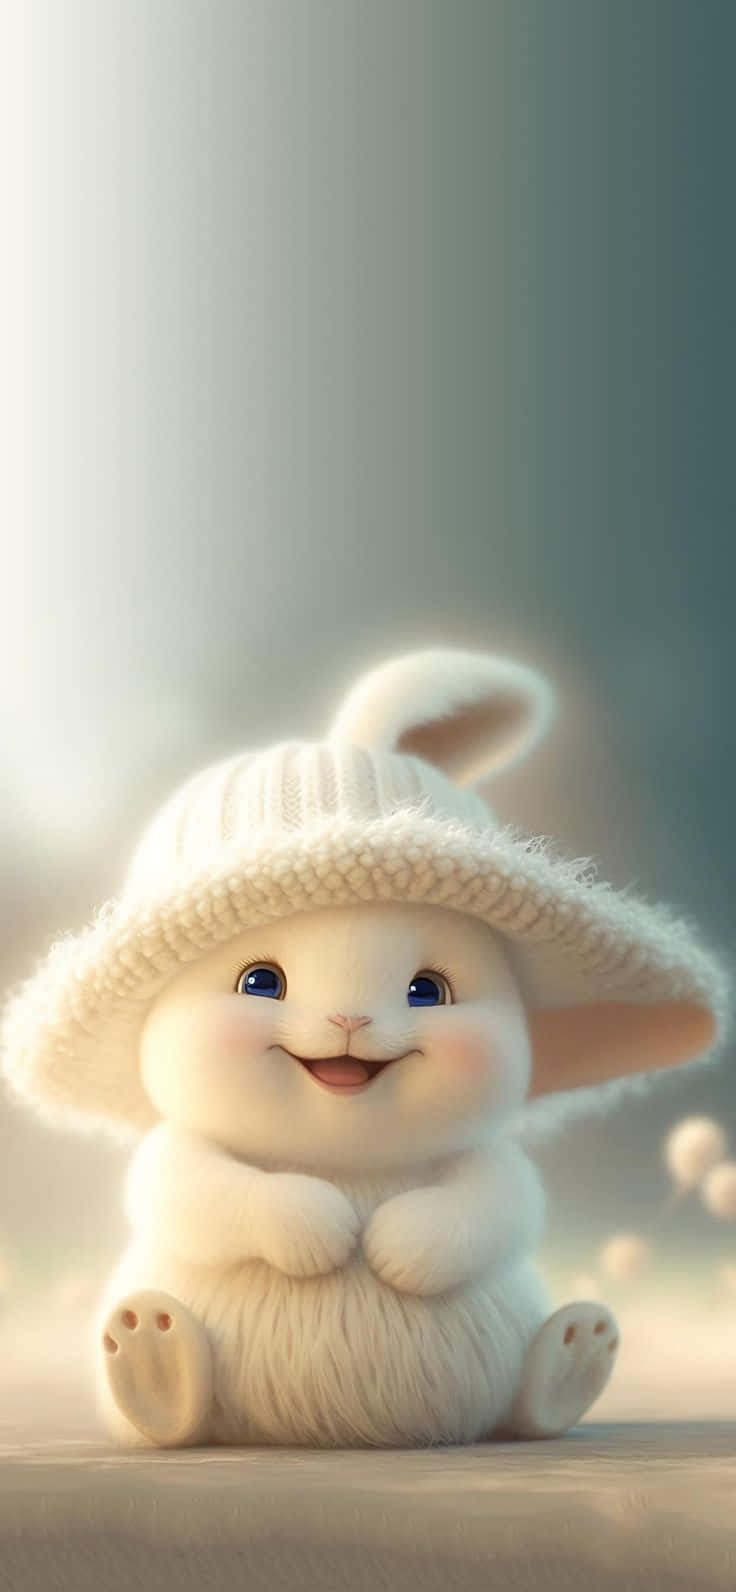 Adorable Bunnyin Knitted Hat Wallpaper